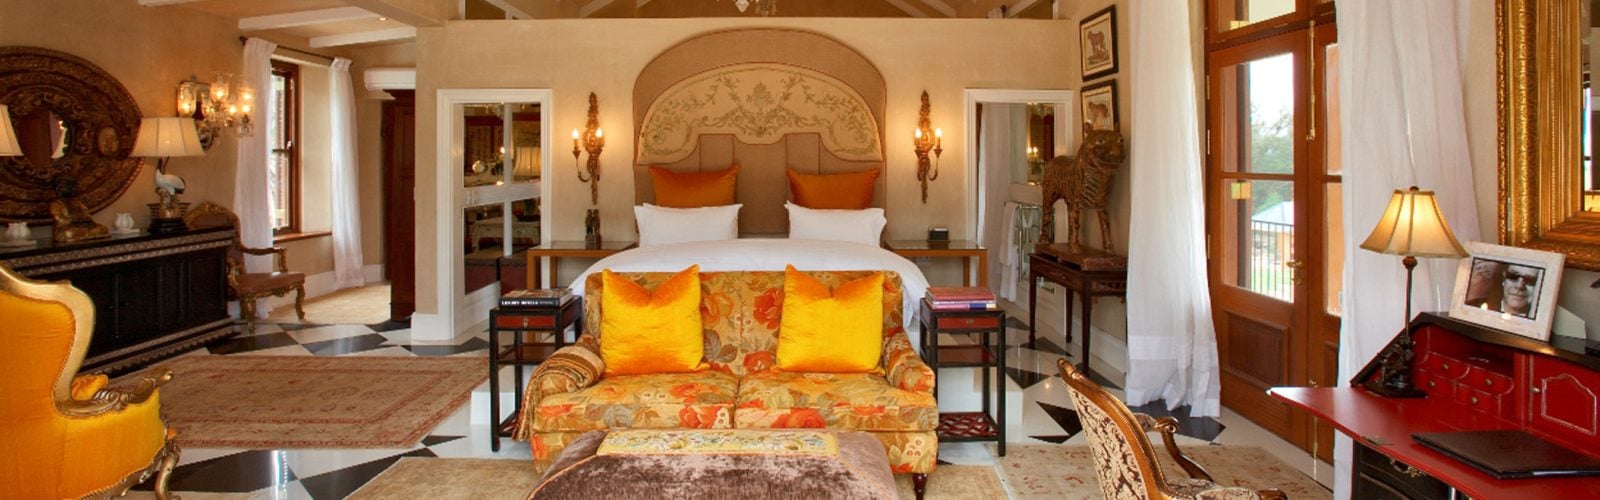 The Maharani Suite, La Residence, The Winelands, South Africa